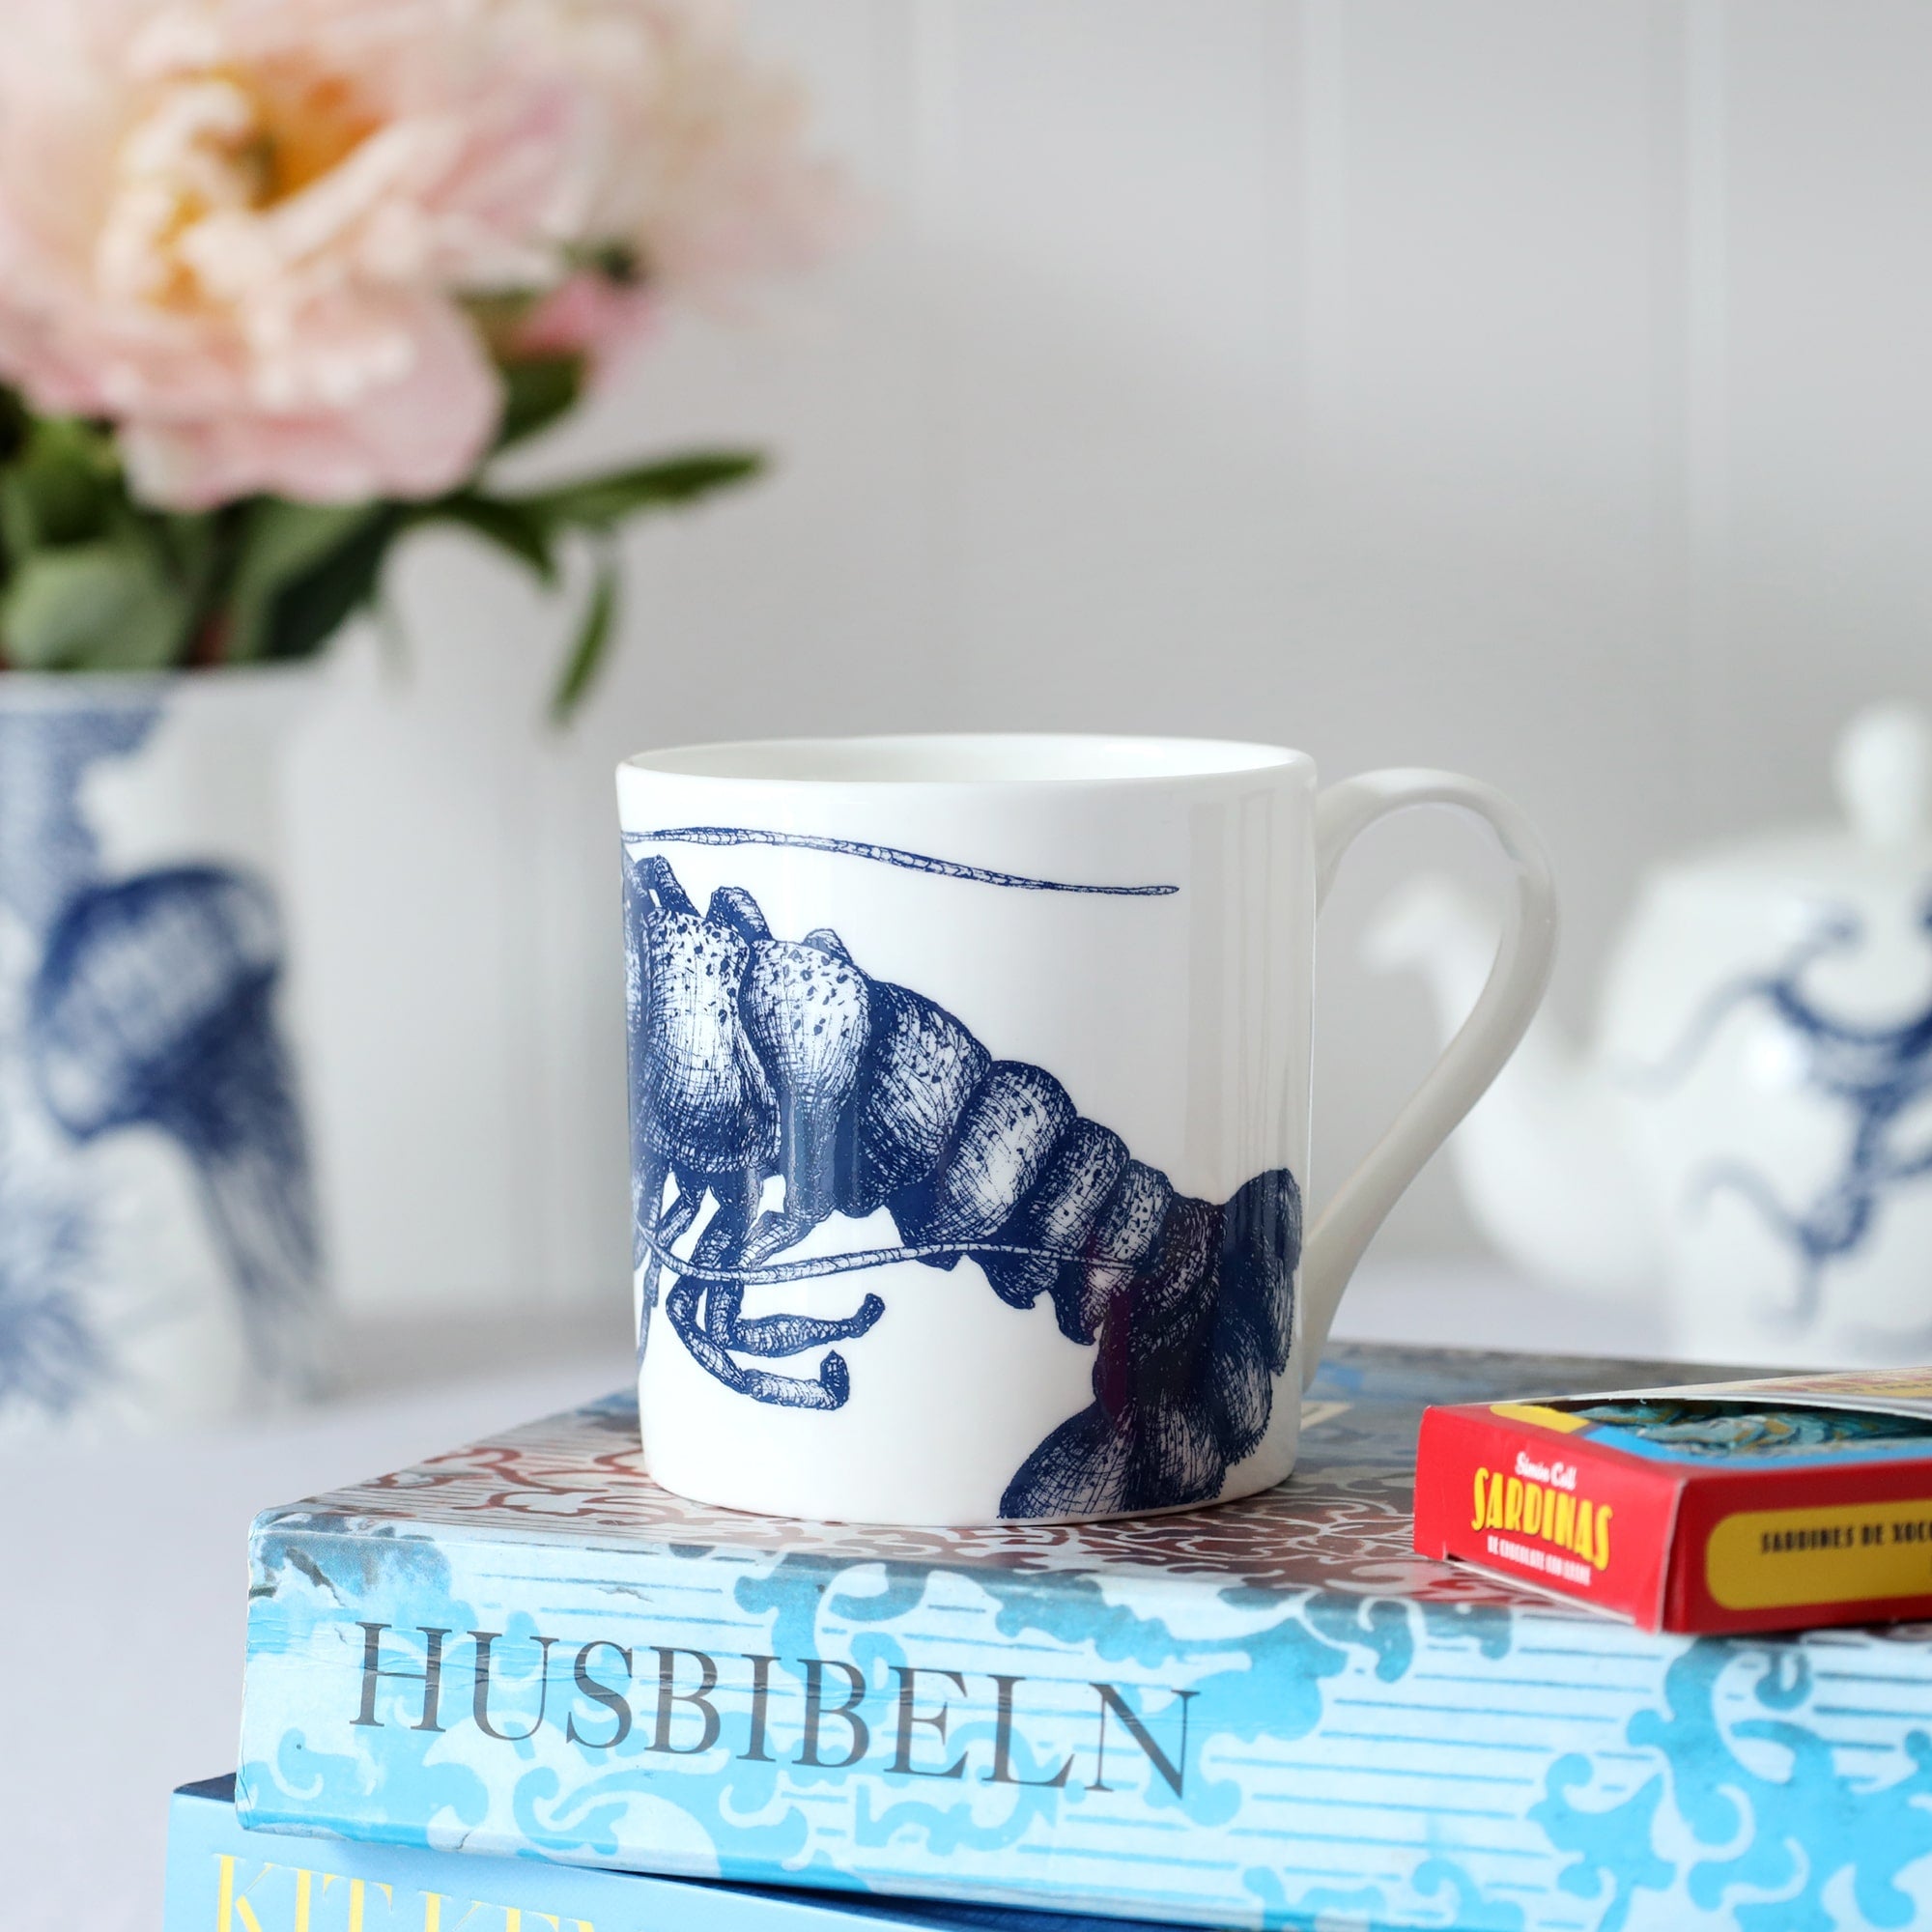 A white bone china mug with the tail of a blue illustrated lobster on it, sitting on a book with flowers & a teapot in the background.